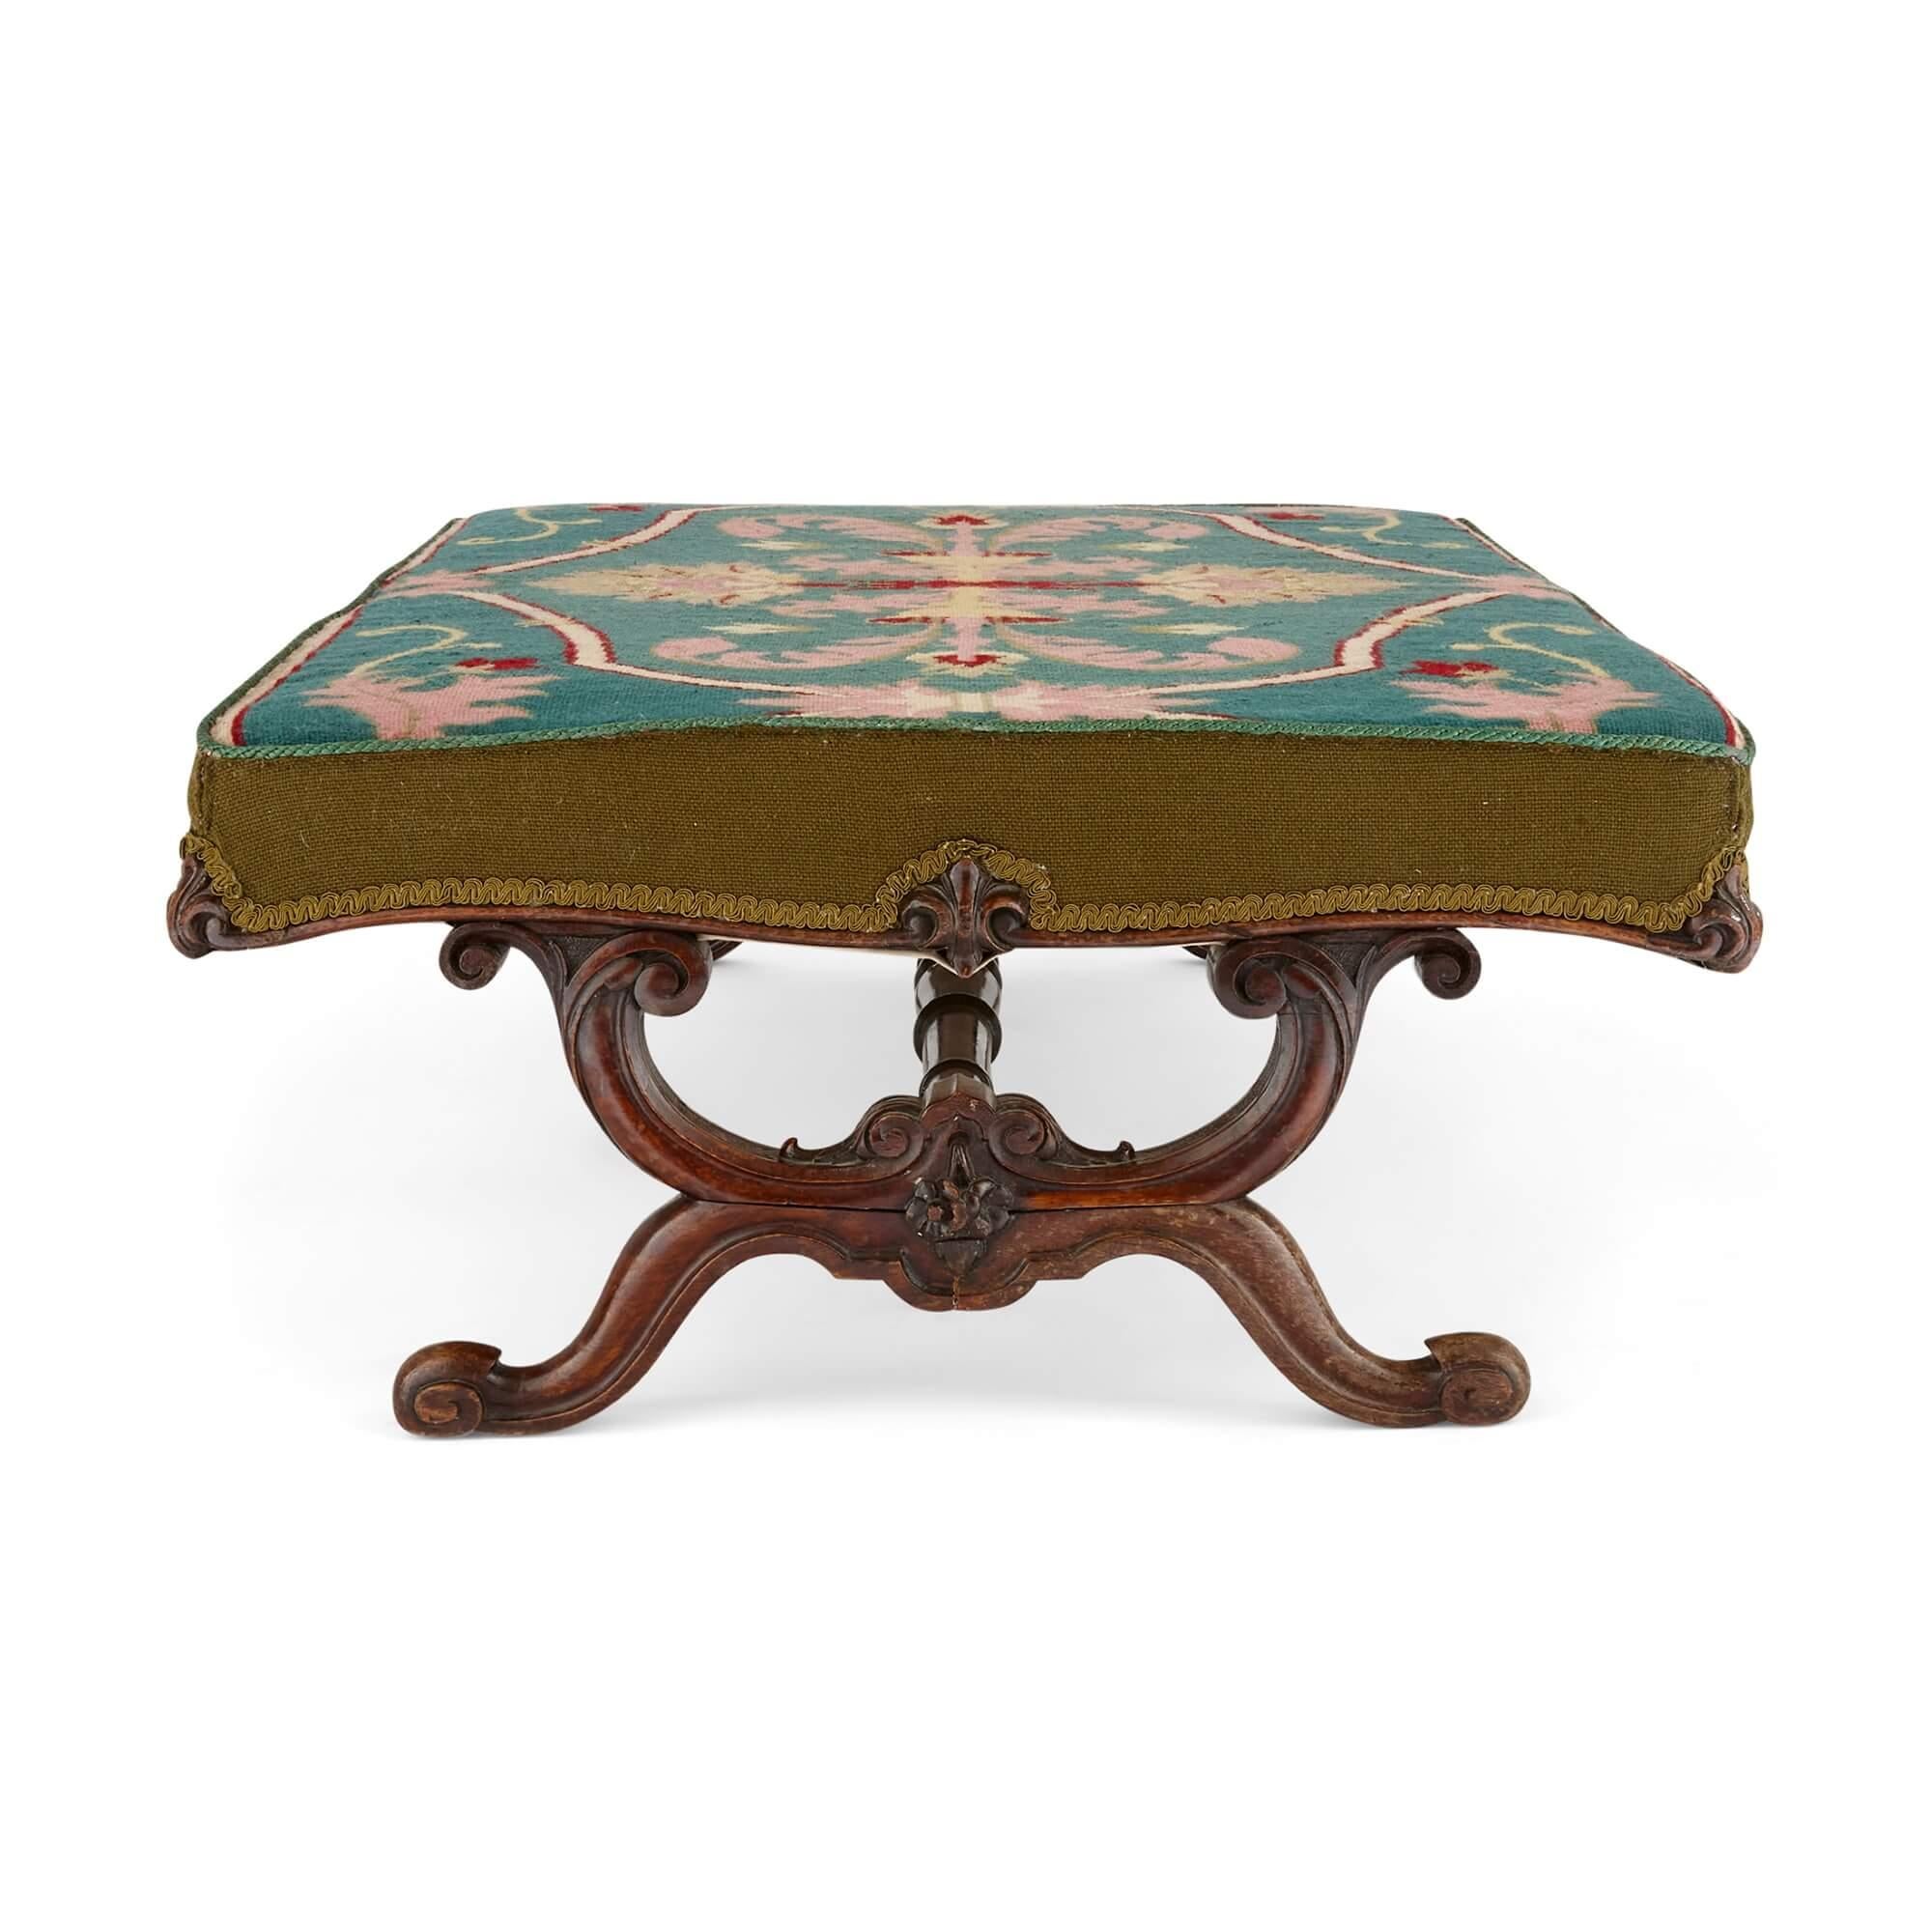 Antique carved hardwood and upholstered Victorian stool
English, Late 19th century
Height 37cm, width 120cm, depth 79cm

Finely carved and upholstered with an elegant floral period Victorian tapestry, this large, wide stool was made in England